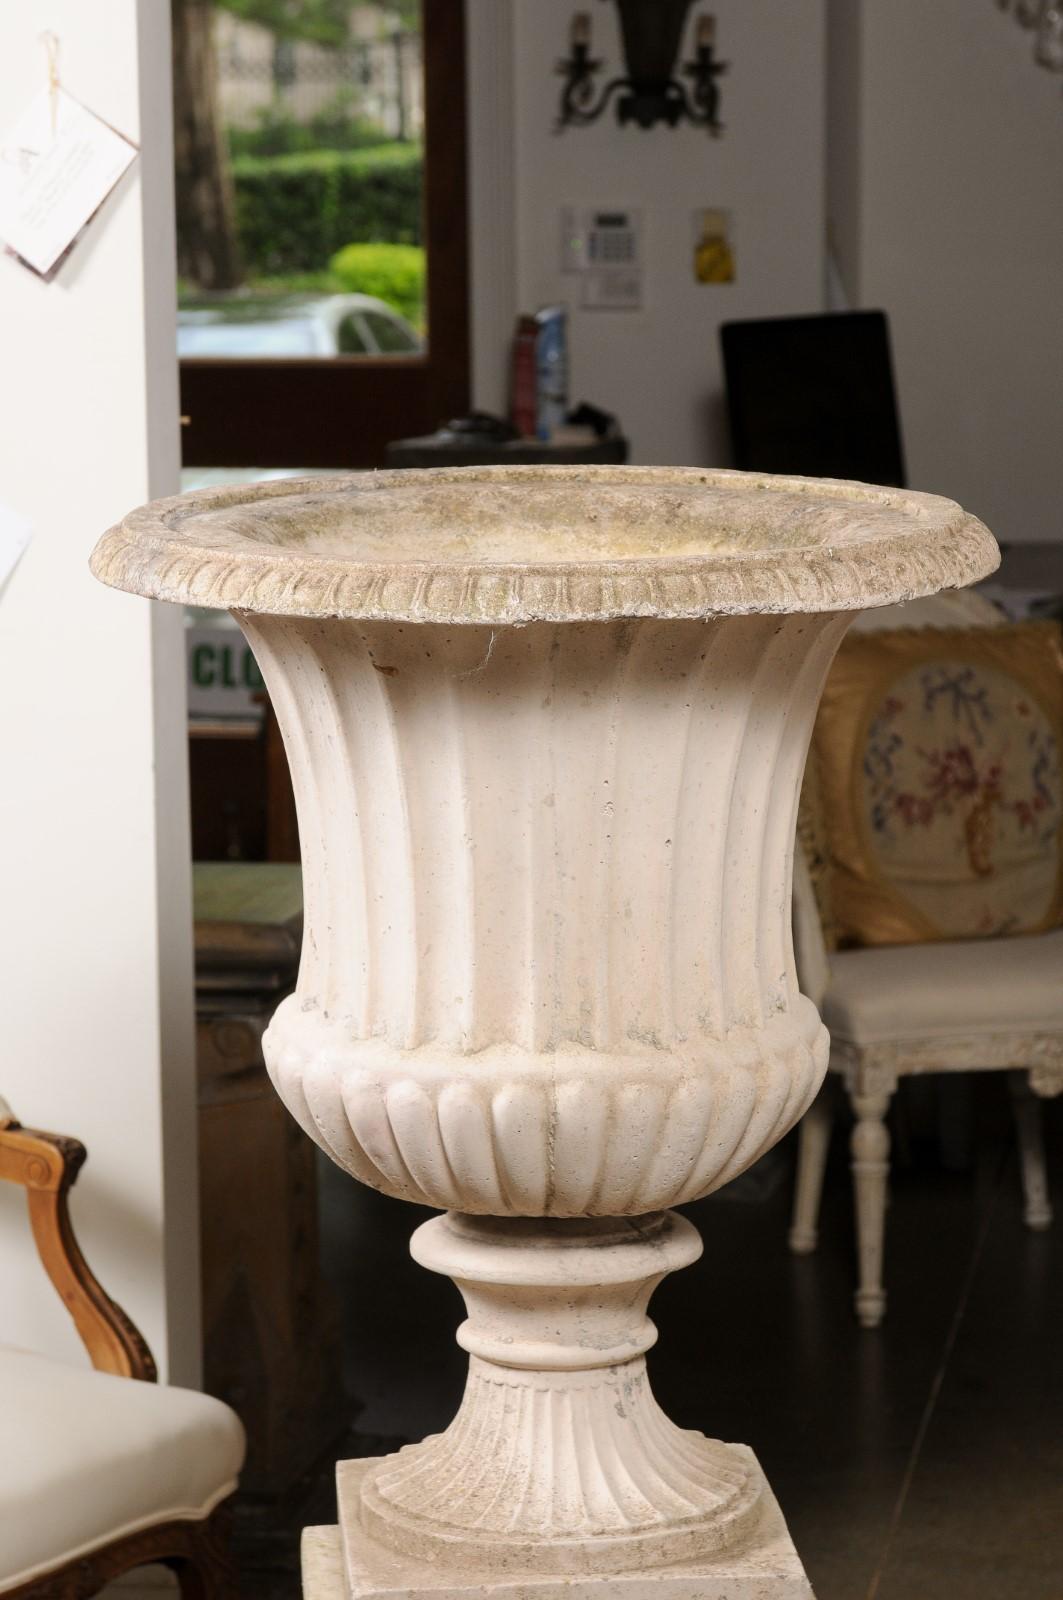 Turn of the Century Italian Campania Urn with Gadroon Motifs on Tall Pedestal 4